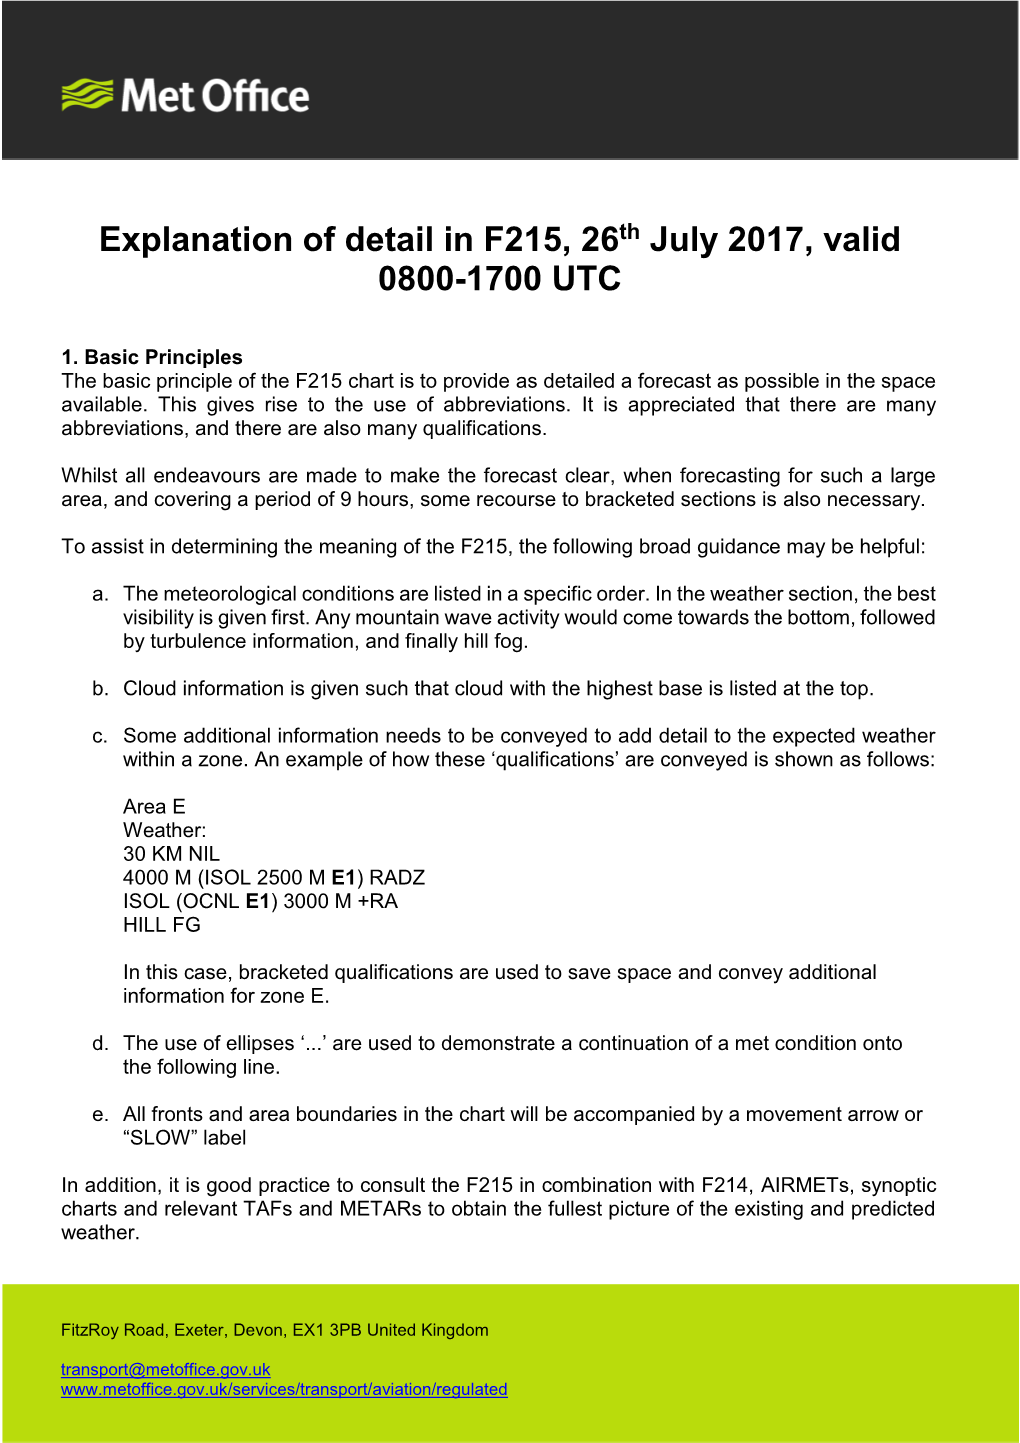 Explanation of Detail in F215, 26Th July 2017, Valid 0800-1700 UTC